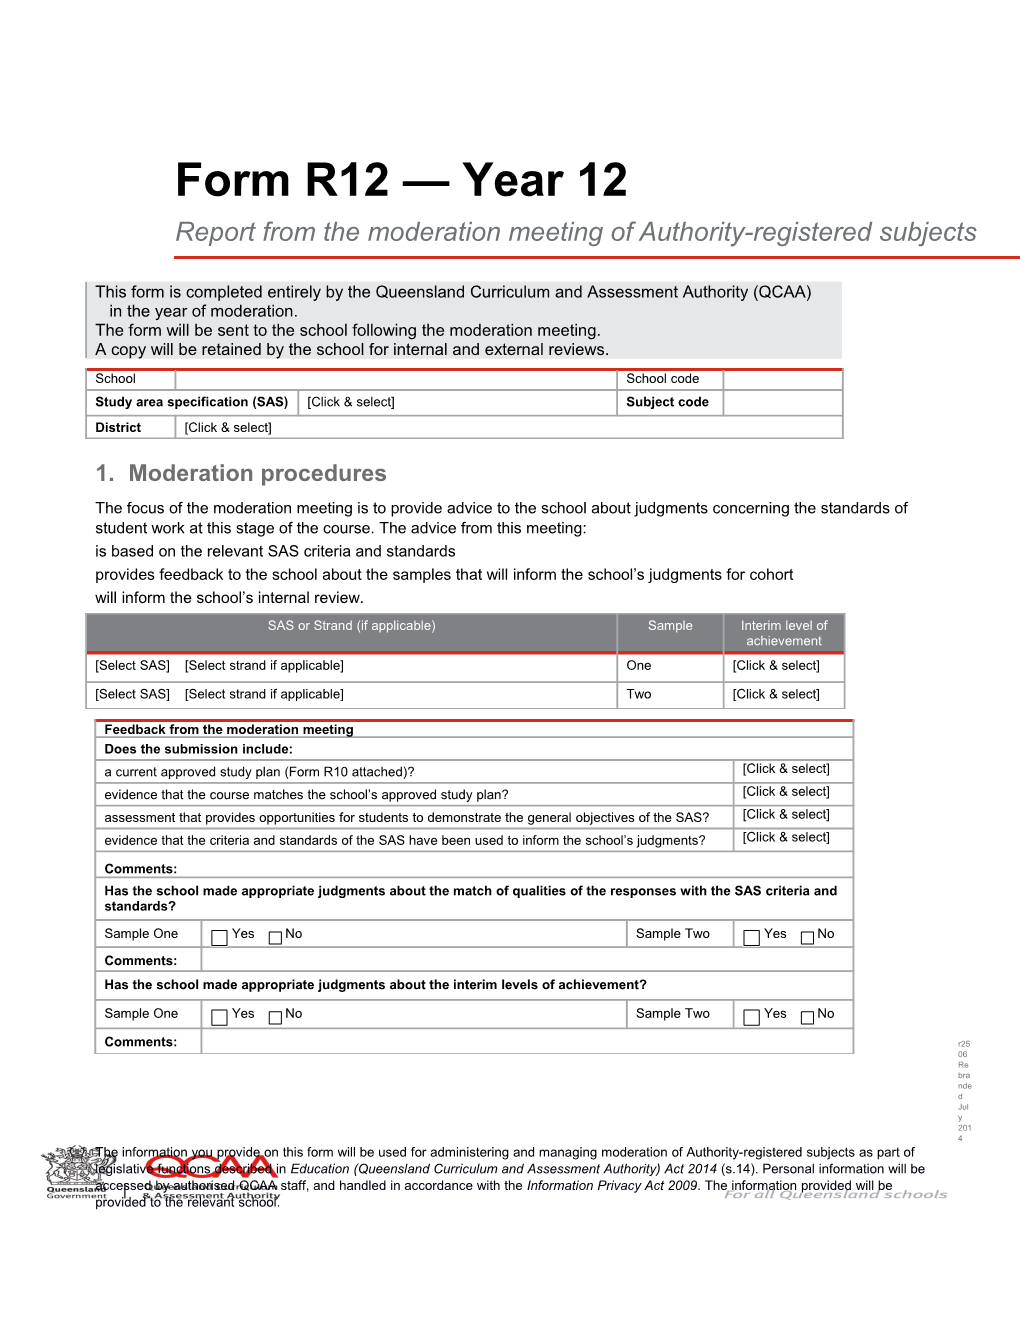 The Information You Provide on This Form Will Be Used for Administering and Managing Moderation